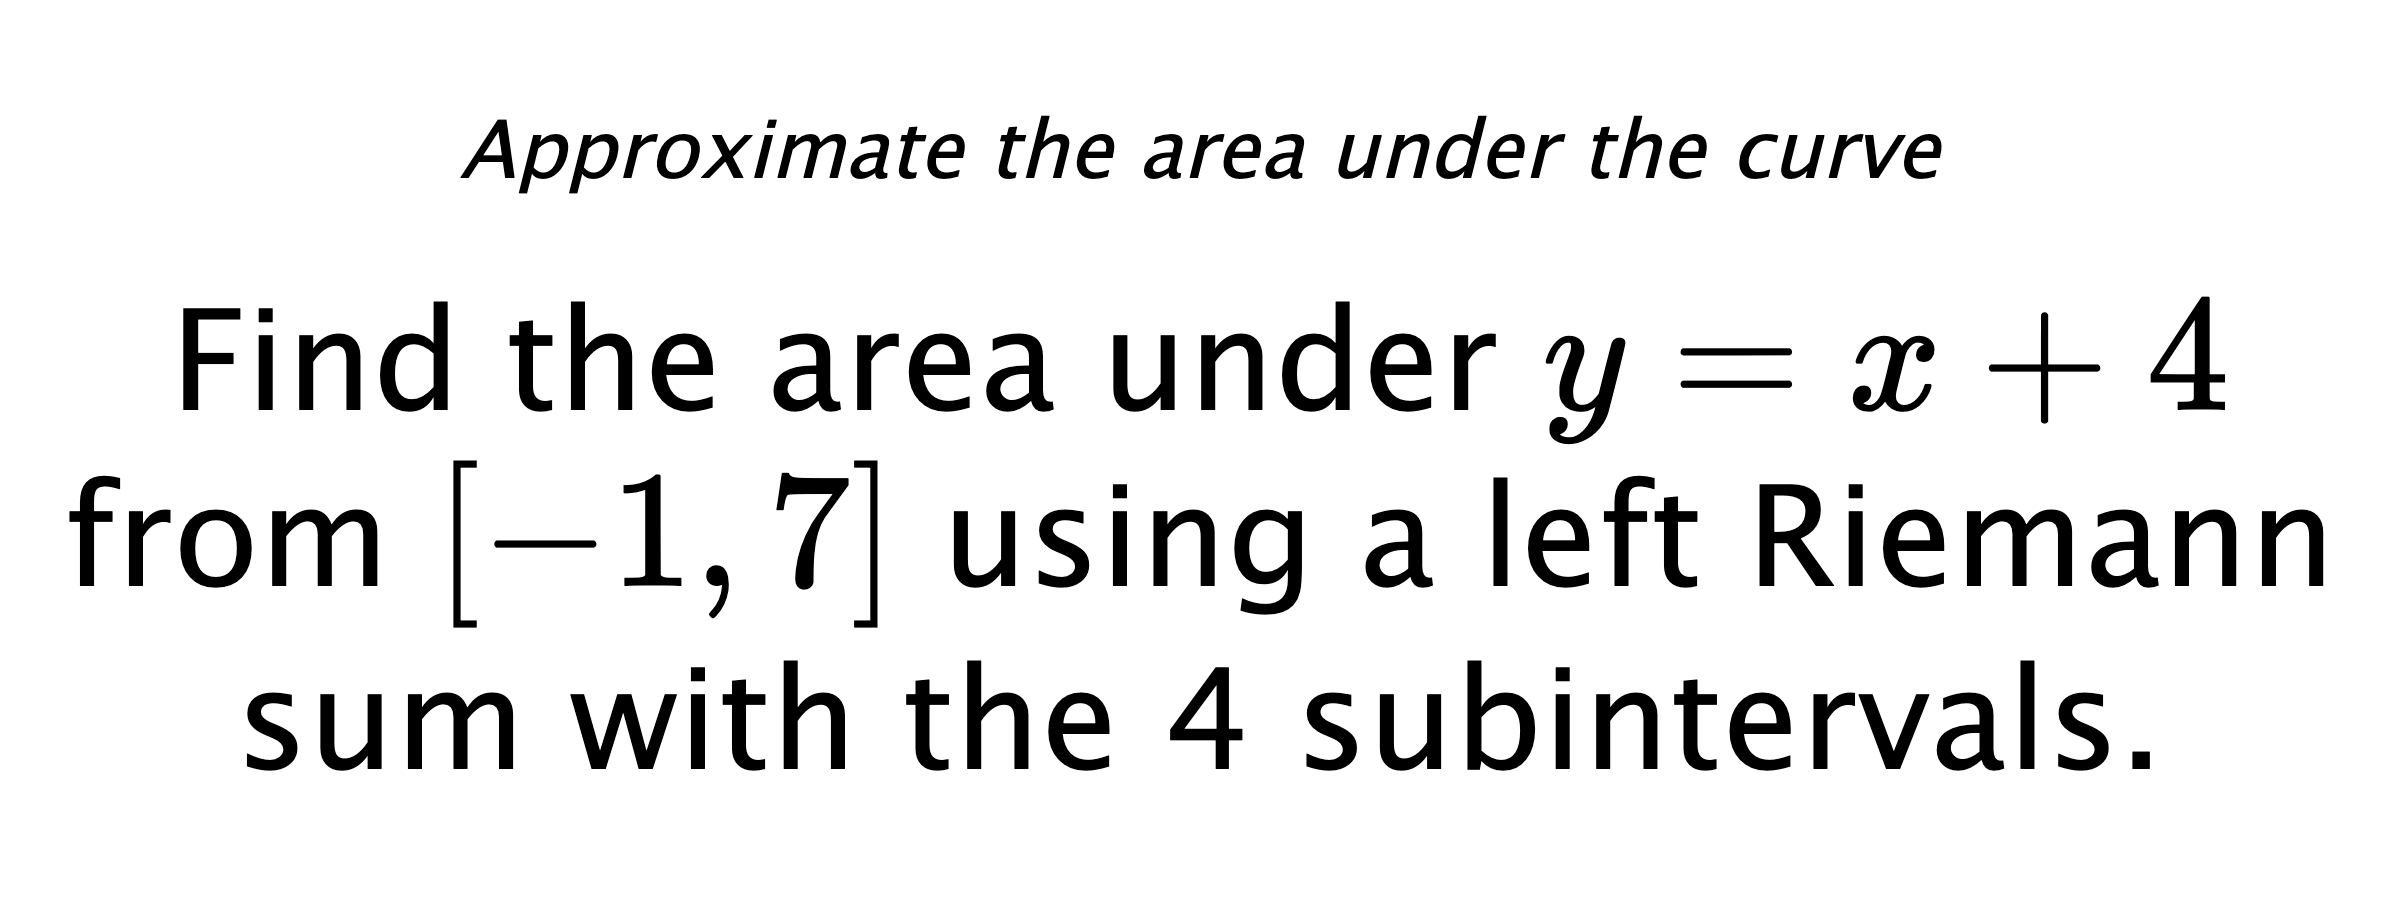 Approximate the area under the curve Find the area under $ y=x+4 $ from $ [-1,7] $ using a left Riemann sum with the 4 subintervals.